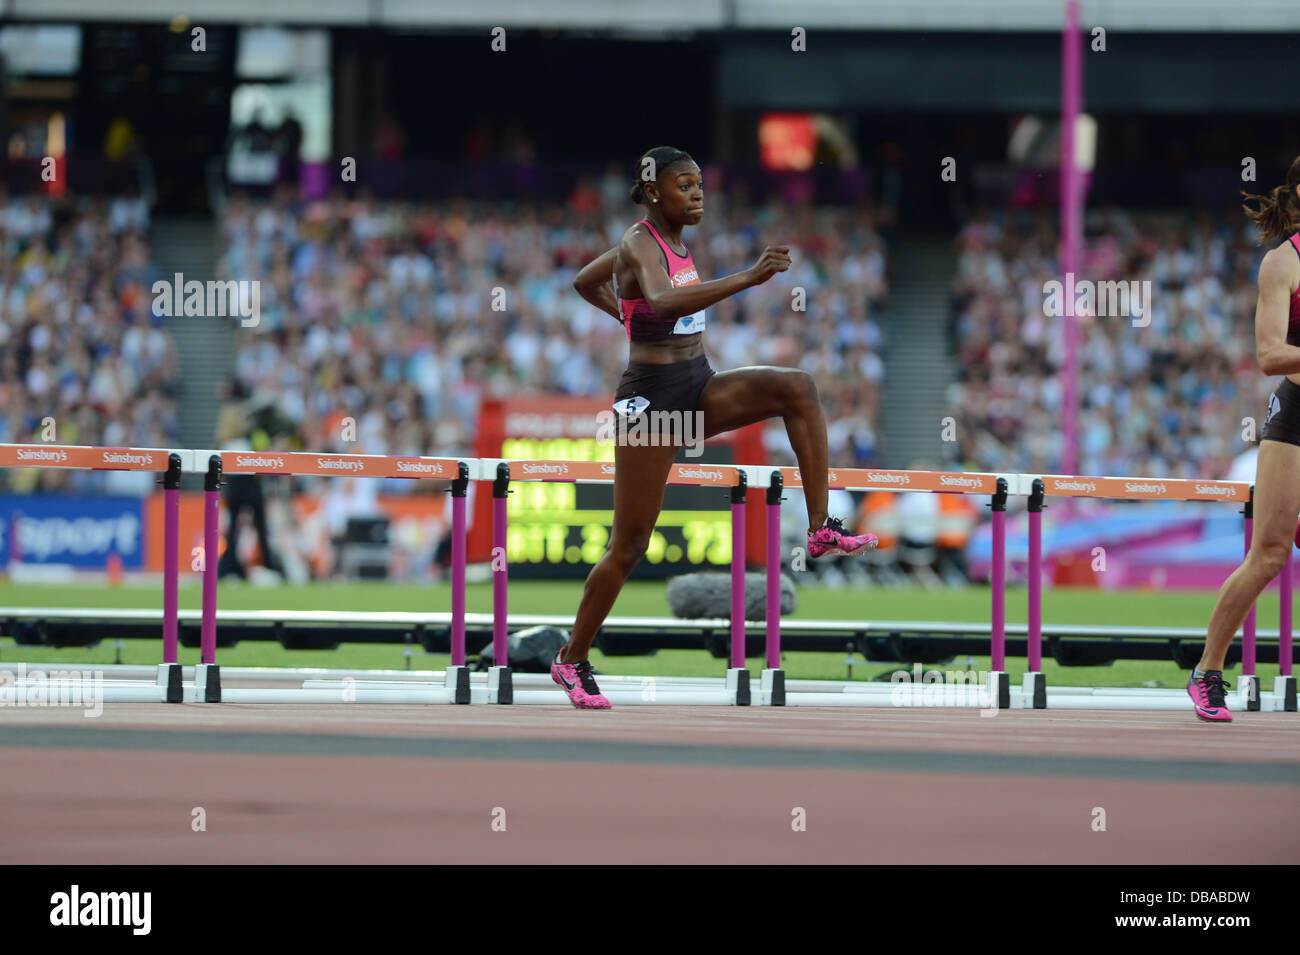 Perry Shakes-Drayton runs a personal best in the women's 400m hurdles at the 2013 Anniversary Games in the Queen Elizabeth Olympic stadium, London Stock Photo